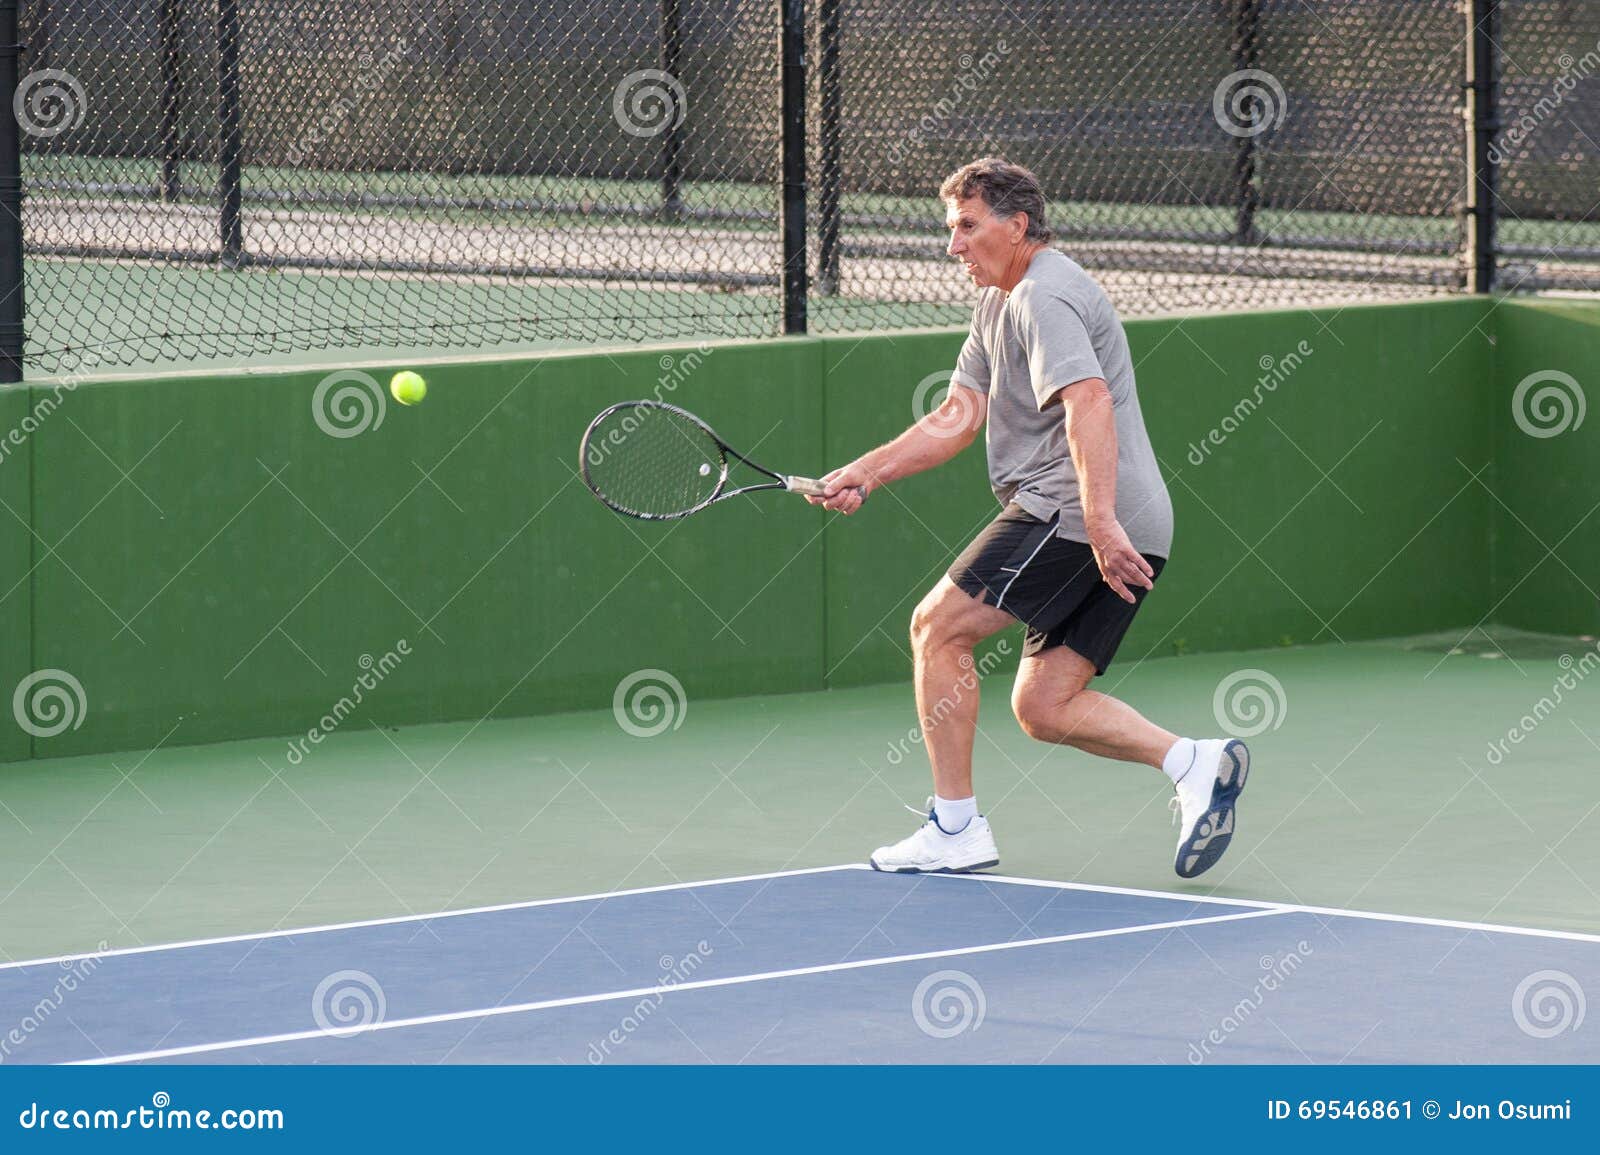 US dollar Refrein Banyan Tennis Player Quick in Getting To the Ball. Stock Image - Image of quick,  game: 69546861